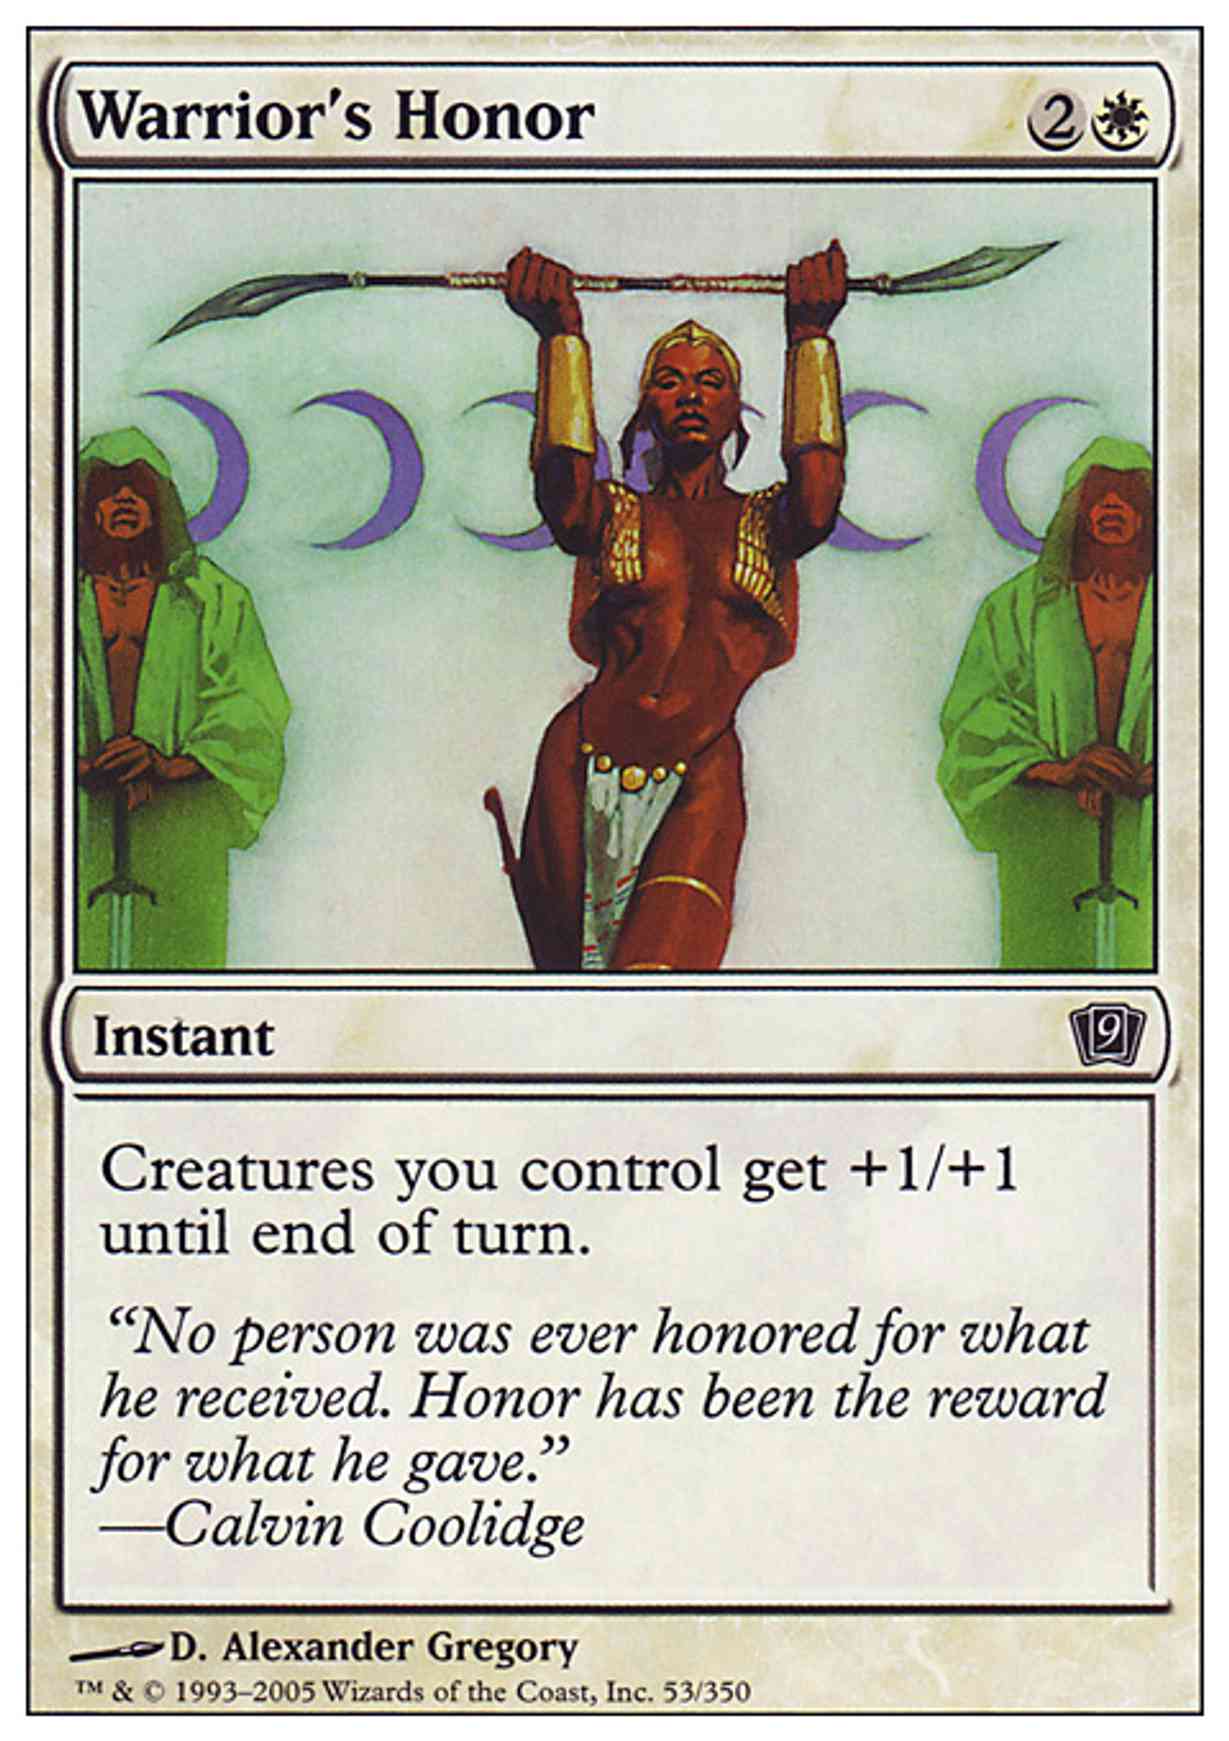 Warrior's Honor magic card front